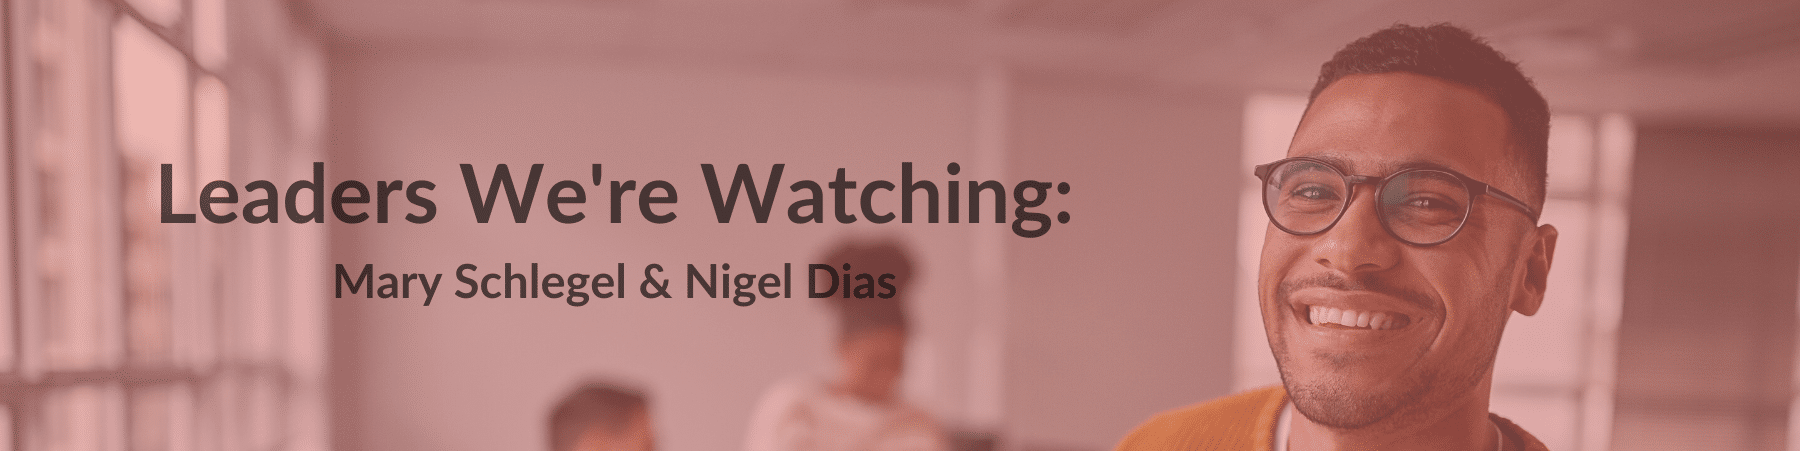 A man smiling at the camera next to the text "Leaders We're Watching: Mary Schlegel & Nigel Dias"